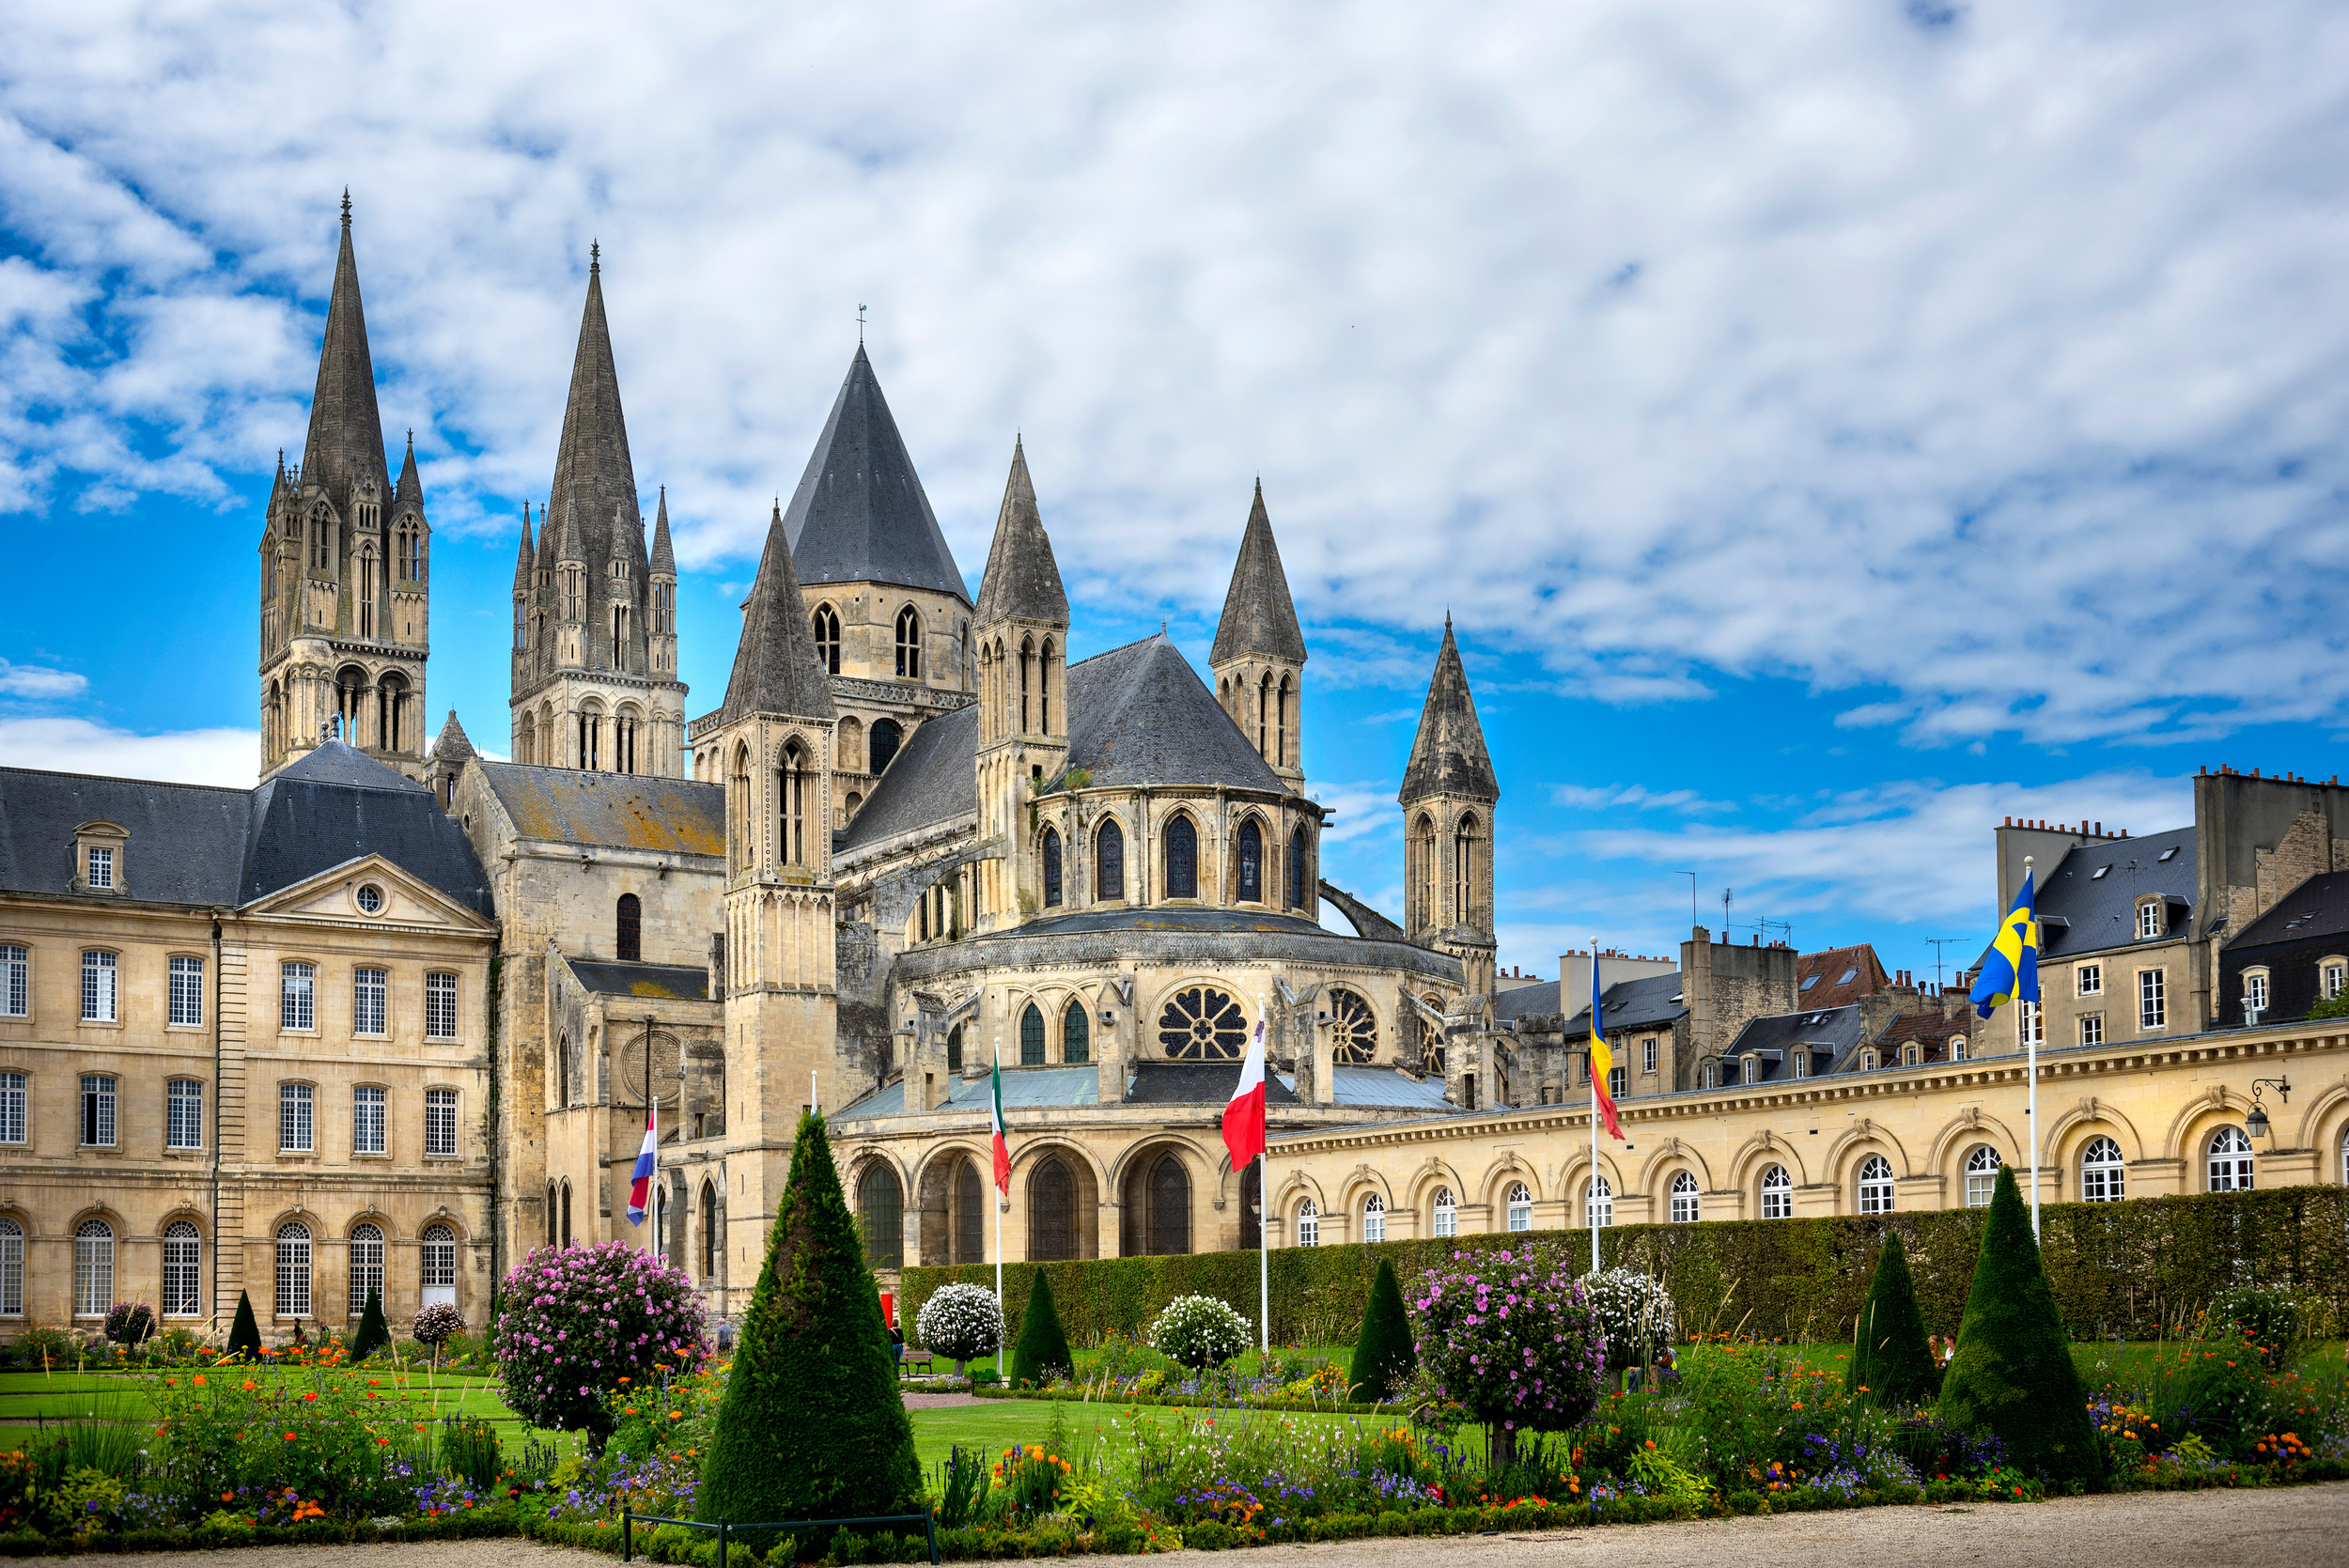 <p>The main city among Champagne vineyards, Reims makes for a nice stop. The unique architecture mixes Art Deco, Gothic, and Medieval. However, the Roman past does crop up in occasional ruins. It’s also known as the coronation city, as over 30 French kings were crowned here. </p><p><a href='https://www.msn.com/en-us/community/channel/vid-cj9pqbr0vn9in2b6ddcd8sfgpfq6x6utp44fssrv6mc2gtybw0us'>Follow us on MSN to see more of our exclusive lifestyle content.</a></p>